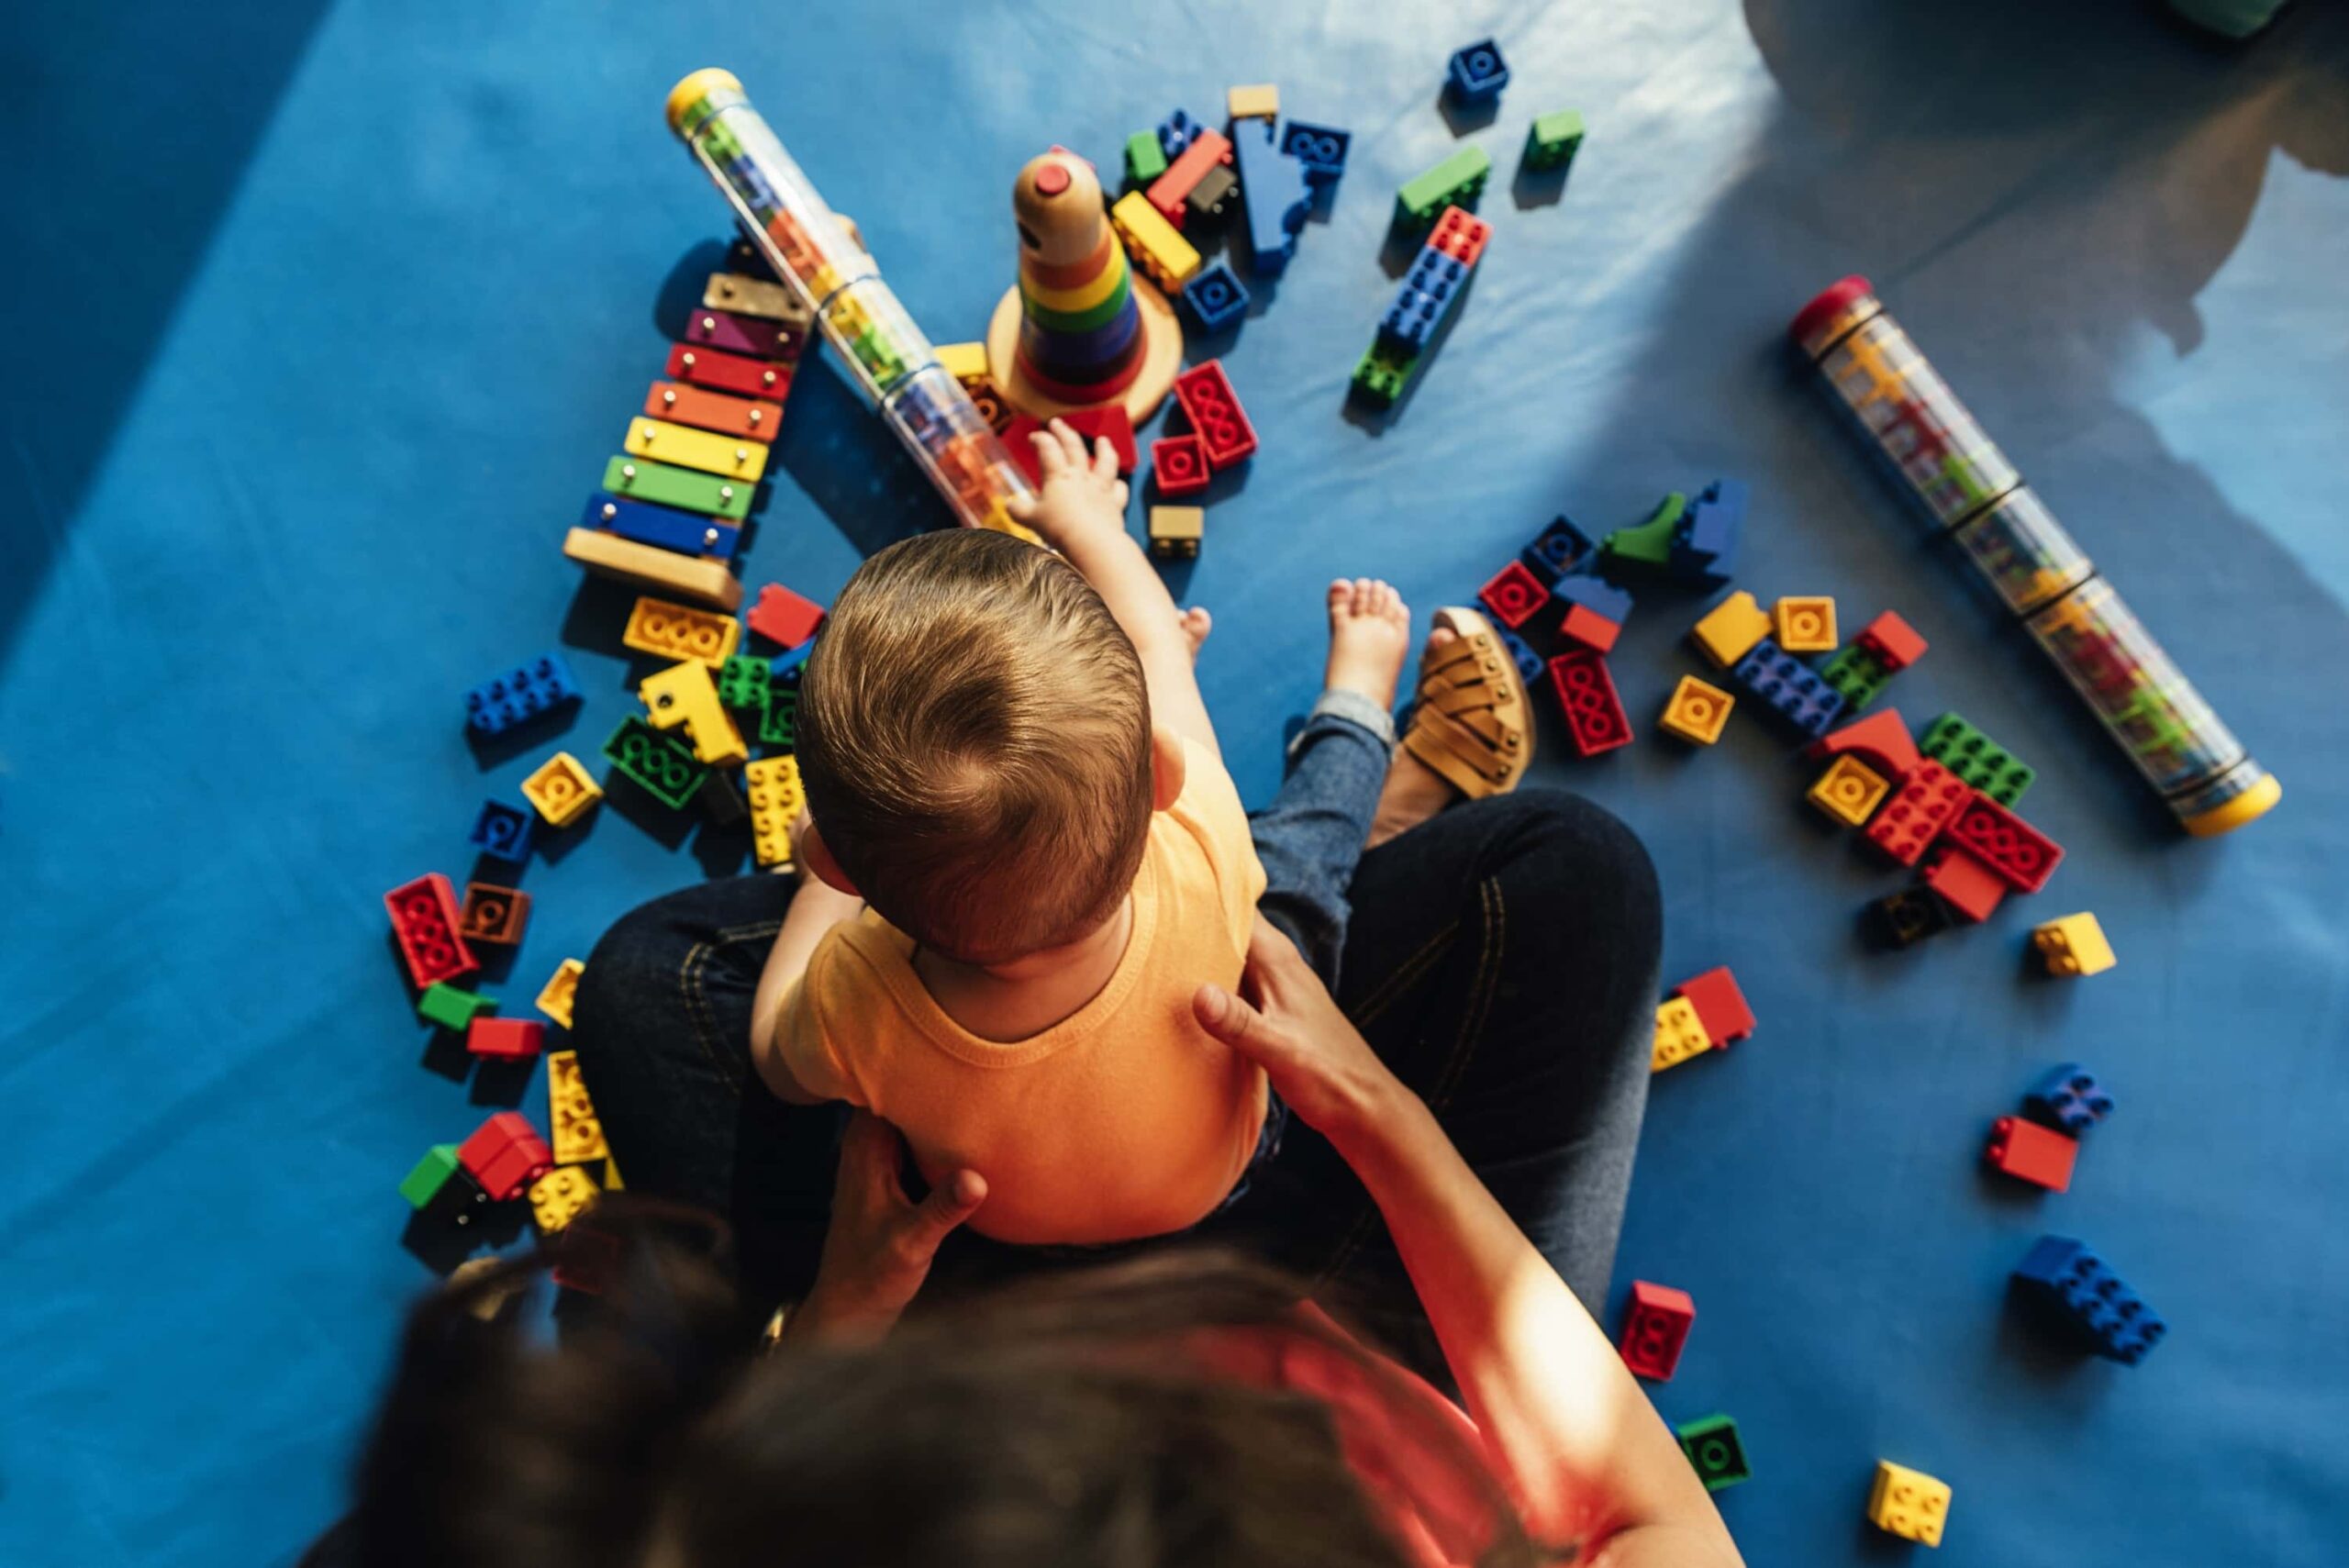 Facilitate play-based learning at home with these fun ideas